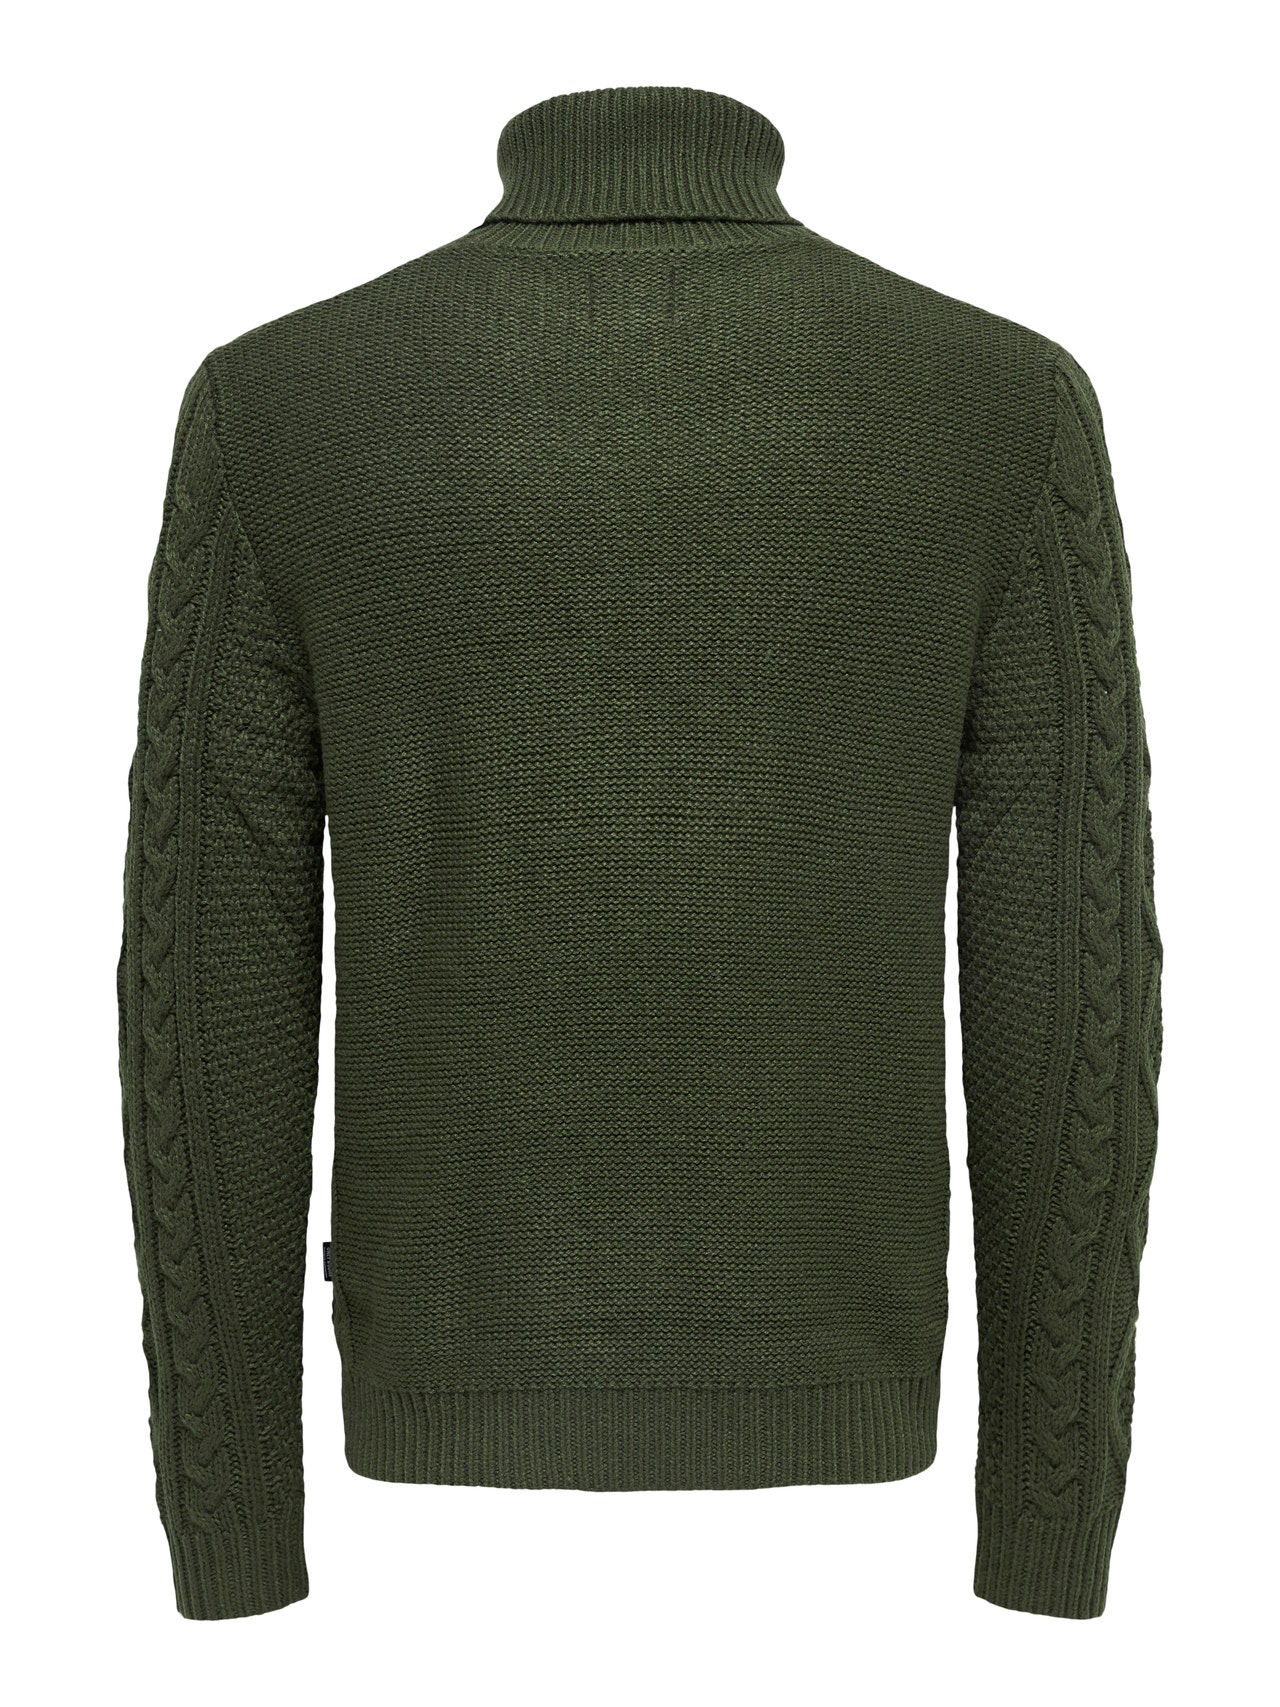 ONLY & SONS Roll neck knitted pullover -Rifle Green - 22023164